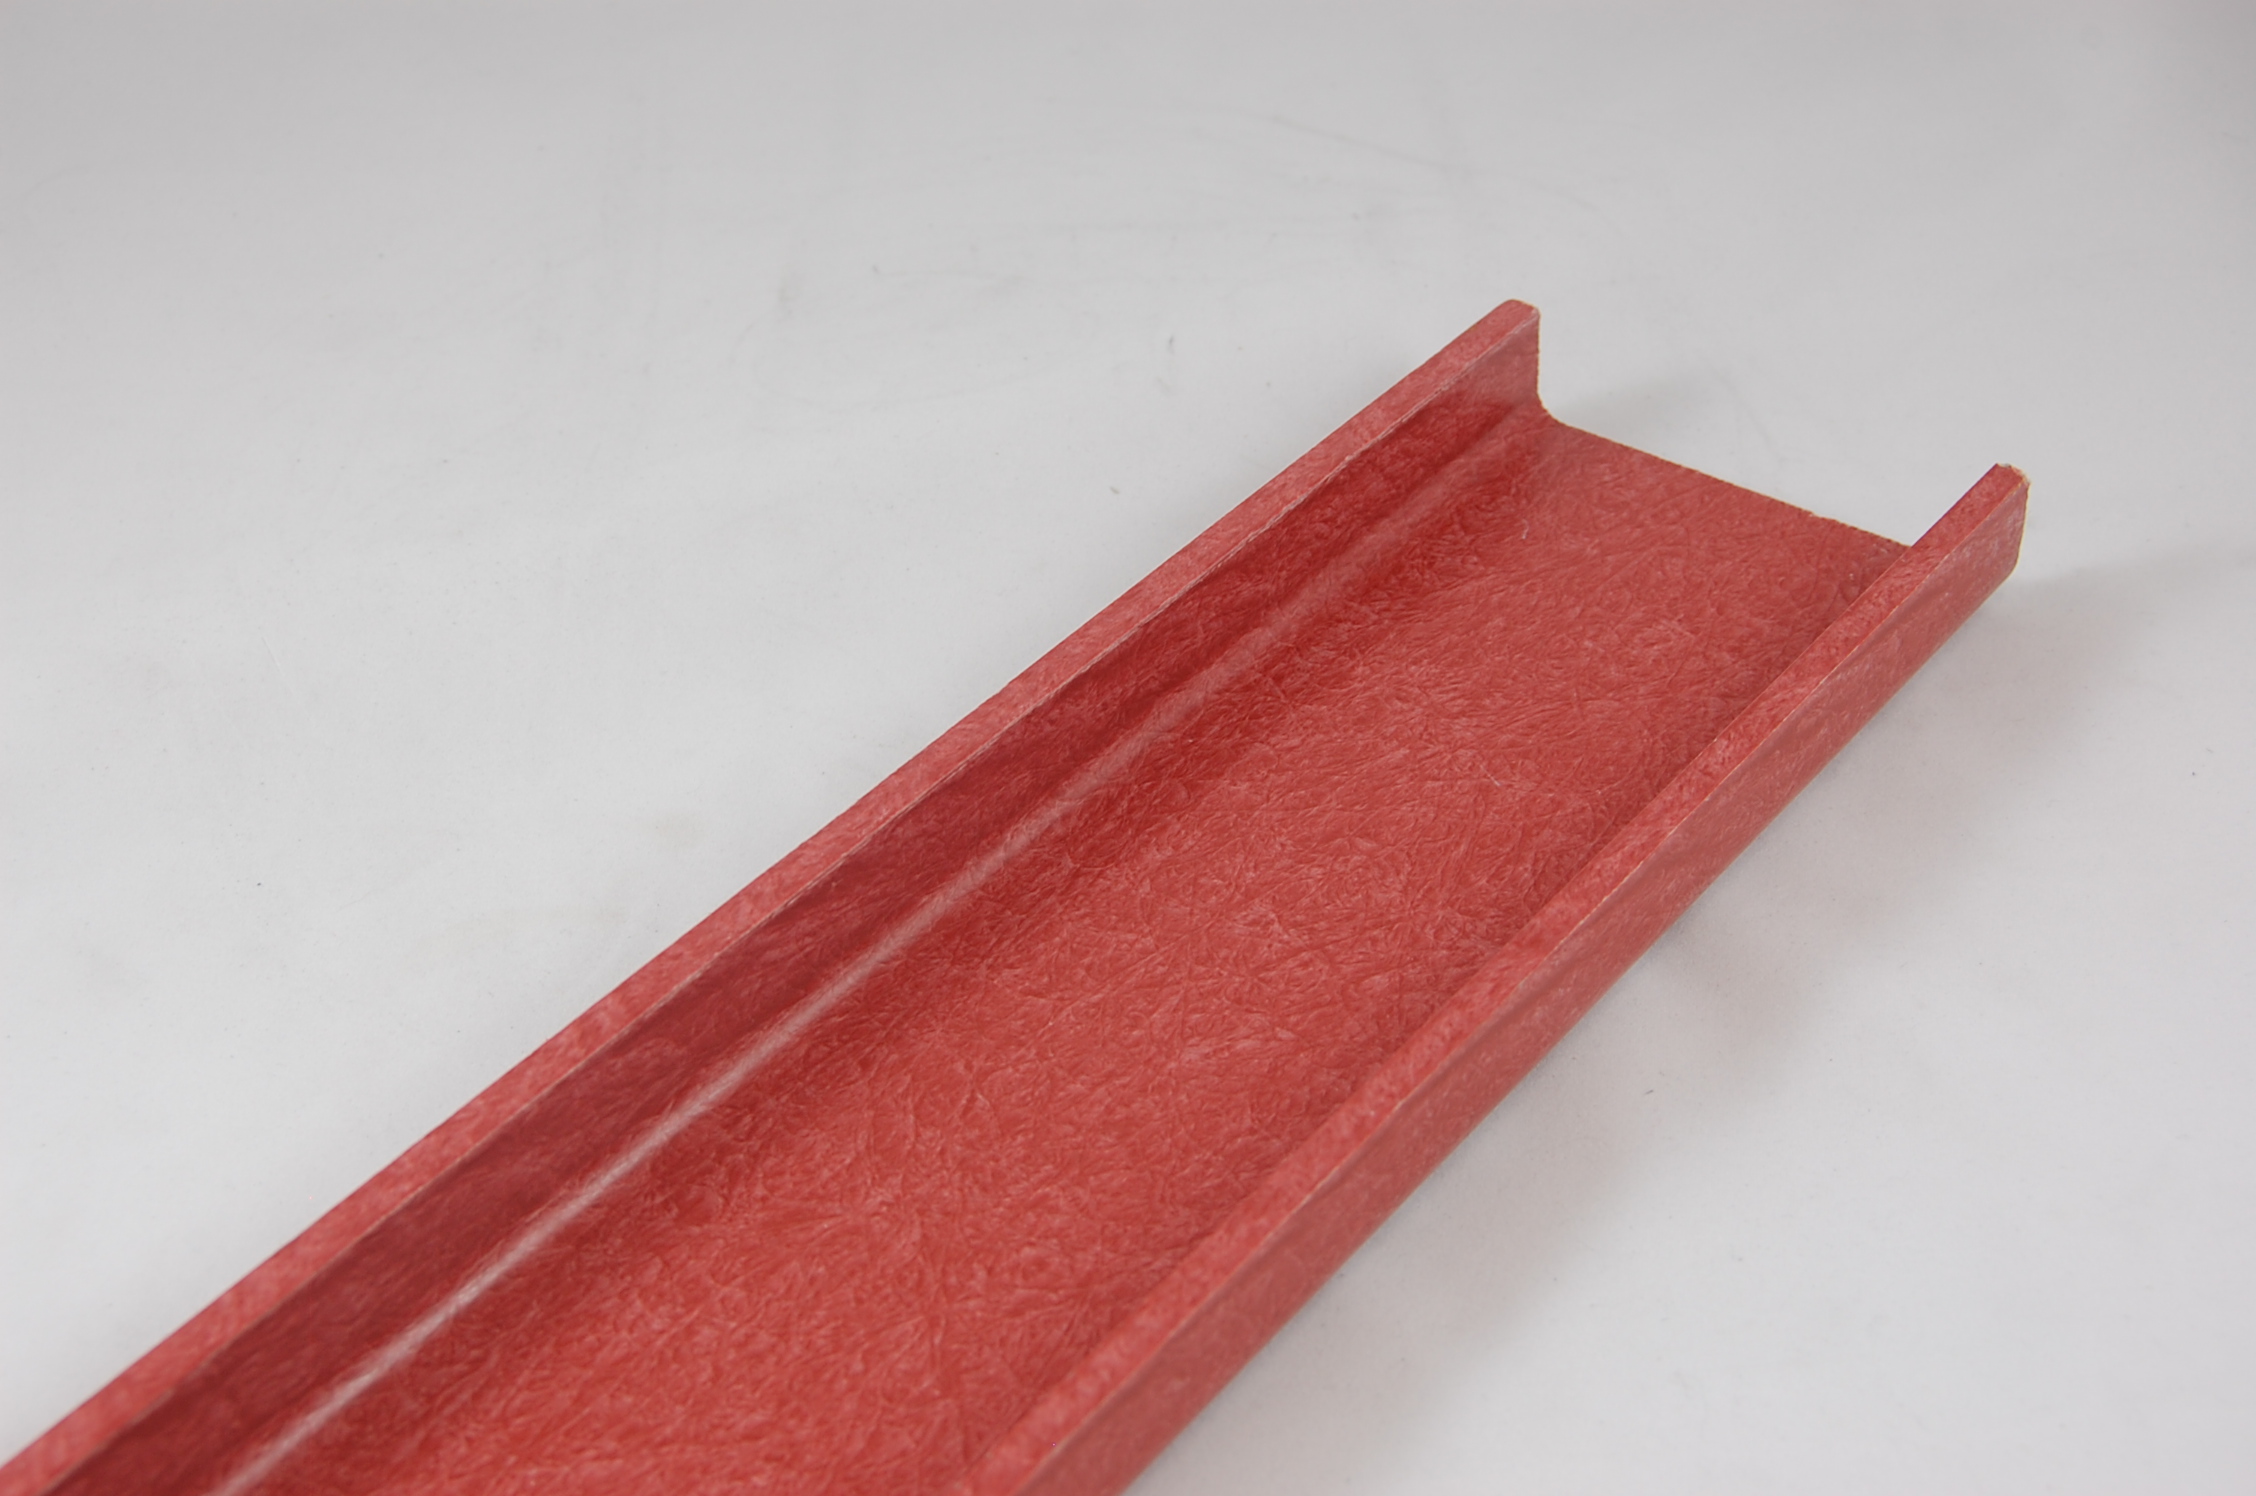 5-1/2"W x 1-1/4" Leg x 5/32" thick GLASROD® Grade 1130 Fiberglass-Reinforced Polyester Laminate Channel, red,  120"L channel